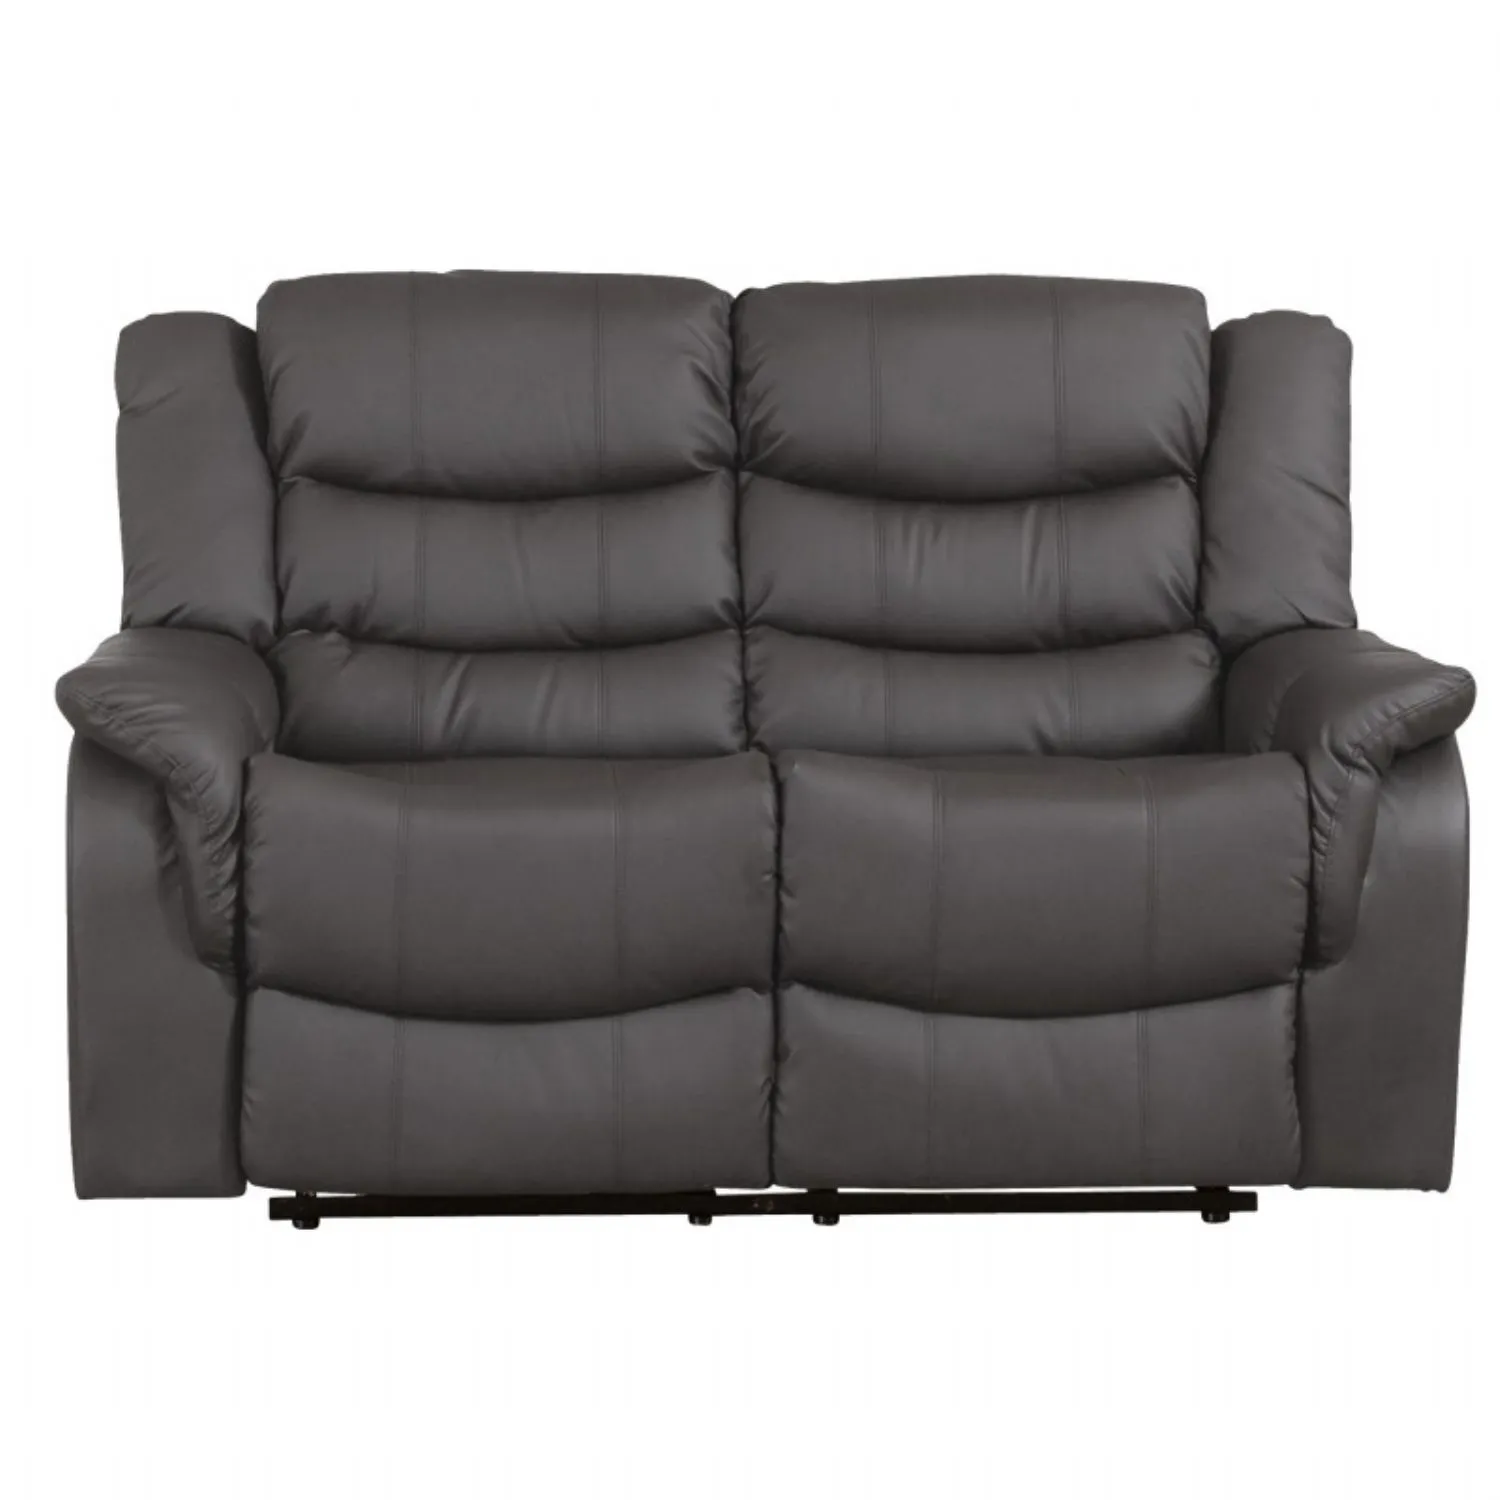 Contract Bonded Leather Recliner 2 Seat Sofas